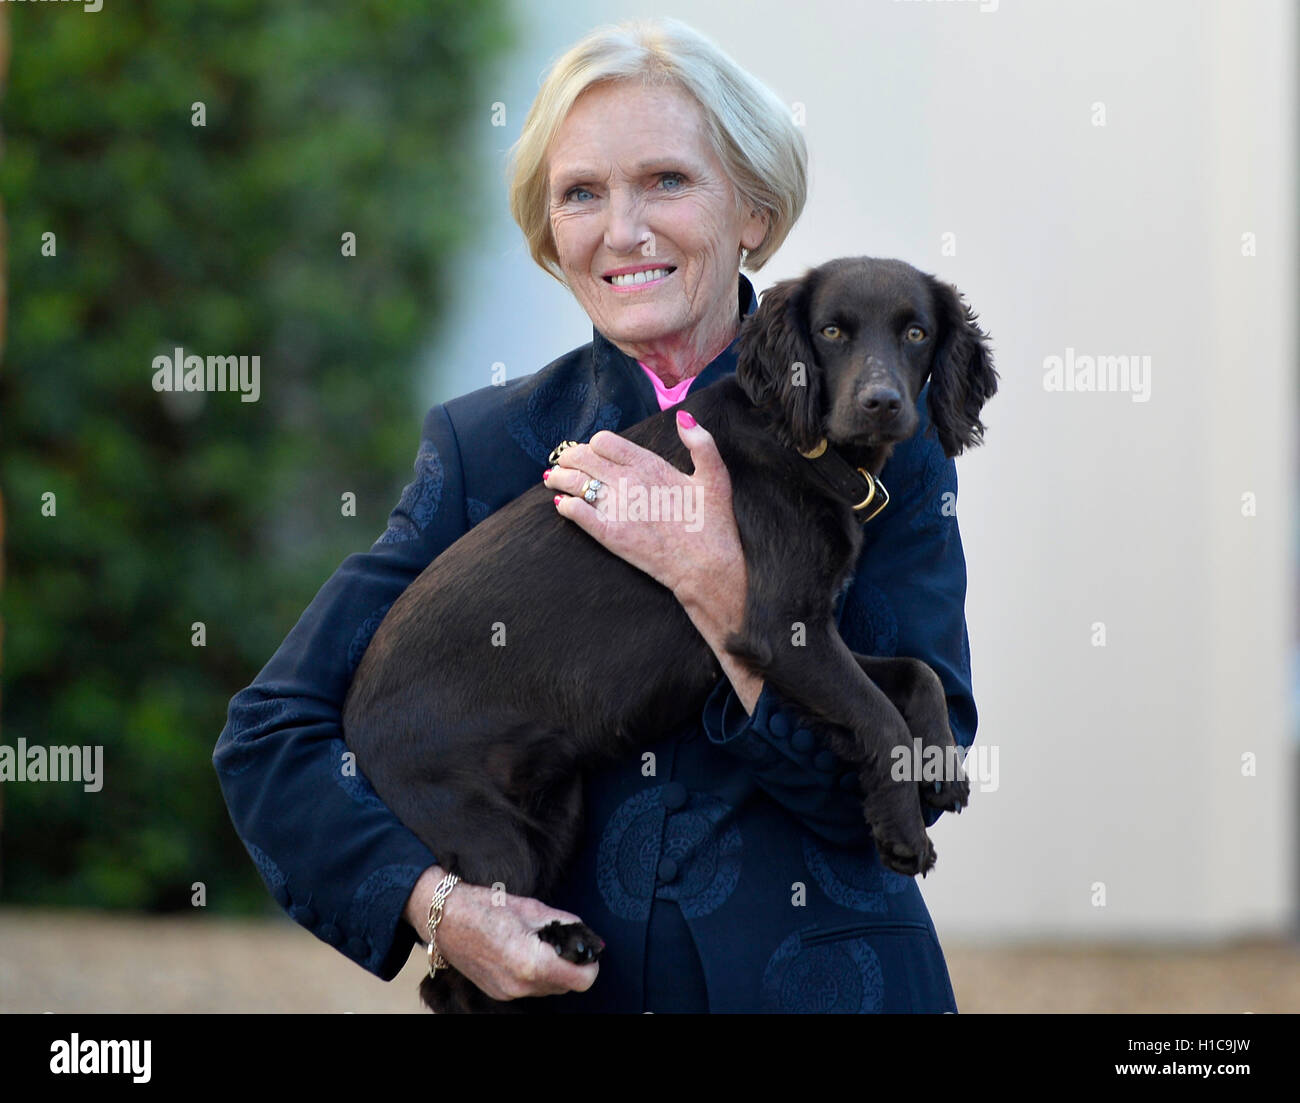 Mary Berry stands with her dog Darcey outside her home in Buckinghamshire, after she announced that she will not join The Great British Bake Off on Channel 4, saying 'My decision to stay with the BBC is out of loyalty to them.' Stock Photo